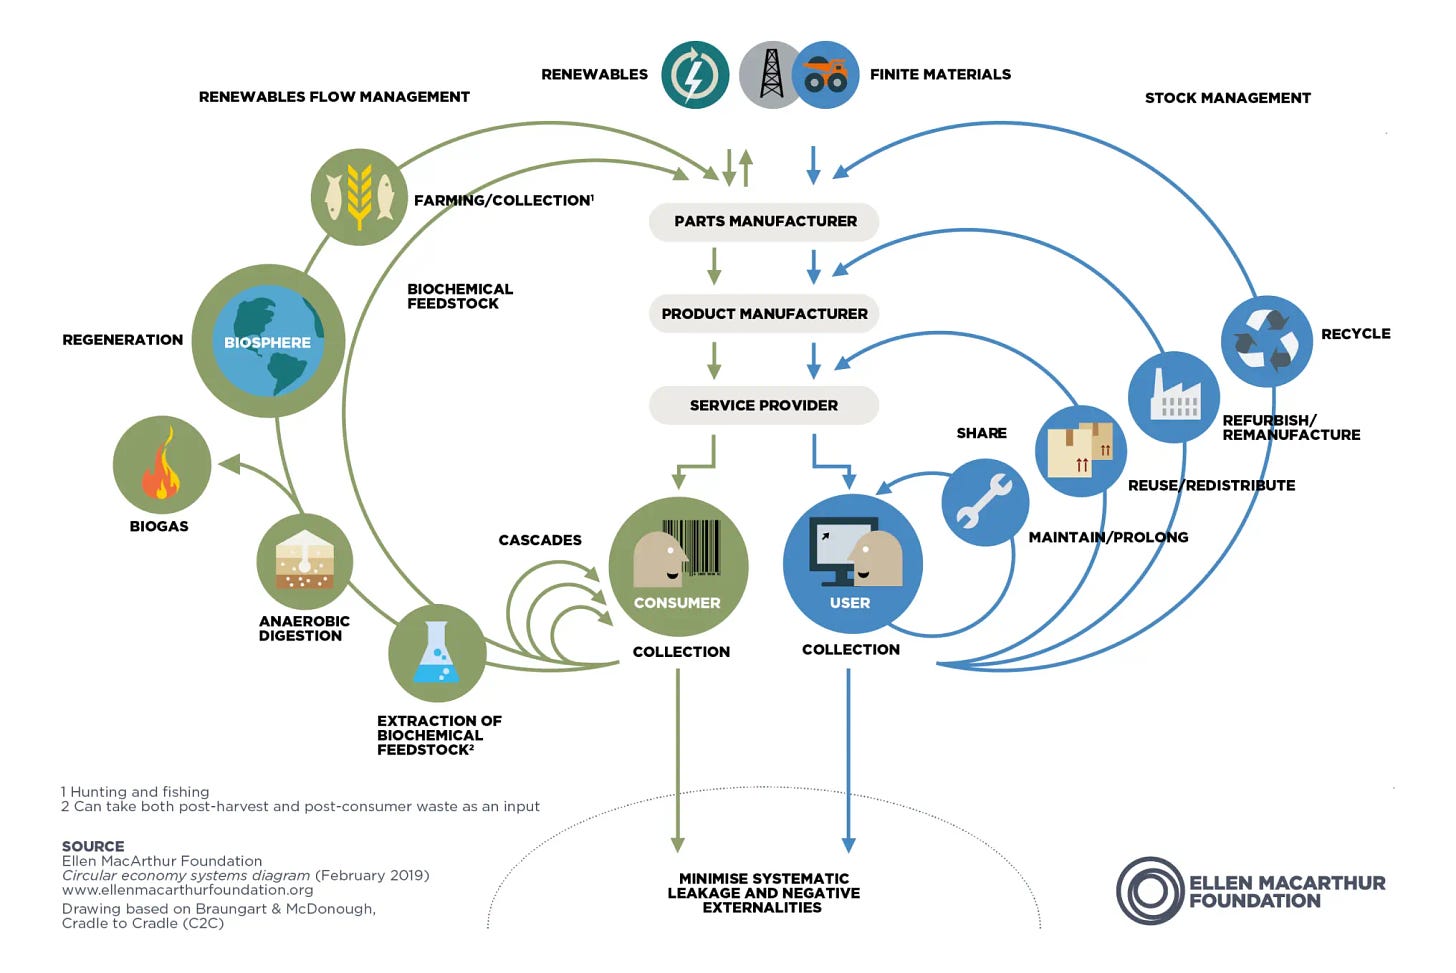 The circular economy in detail